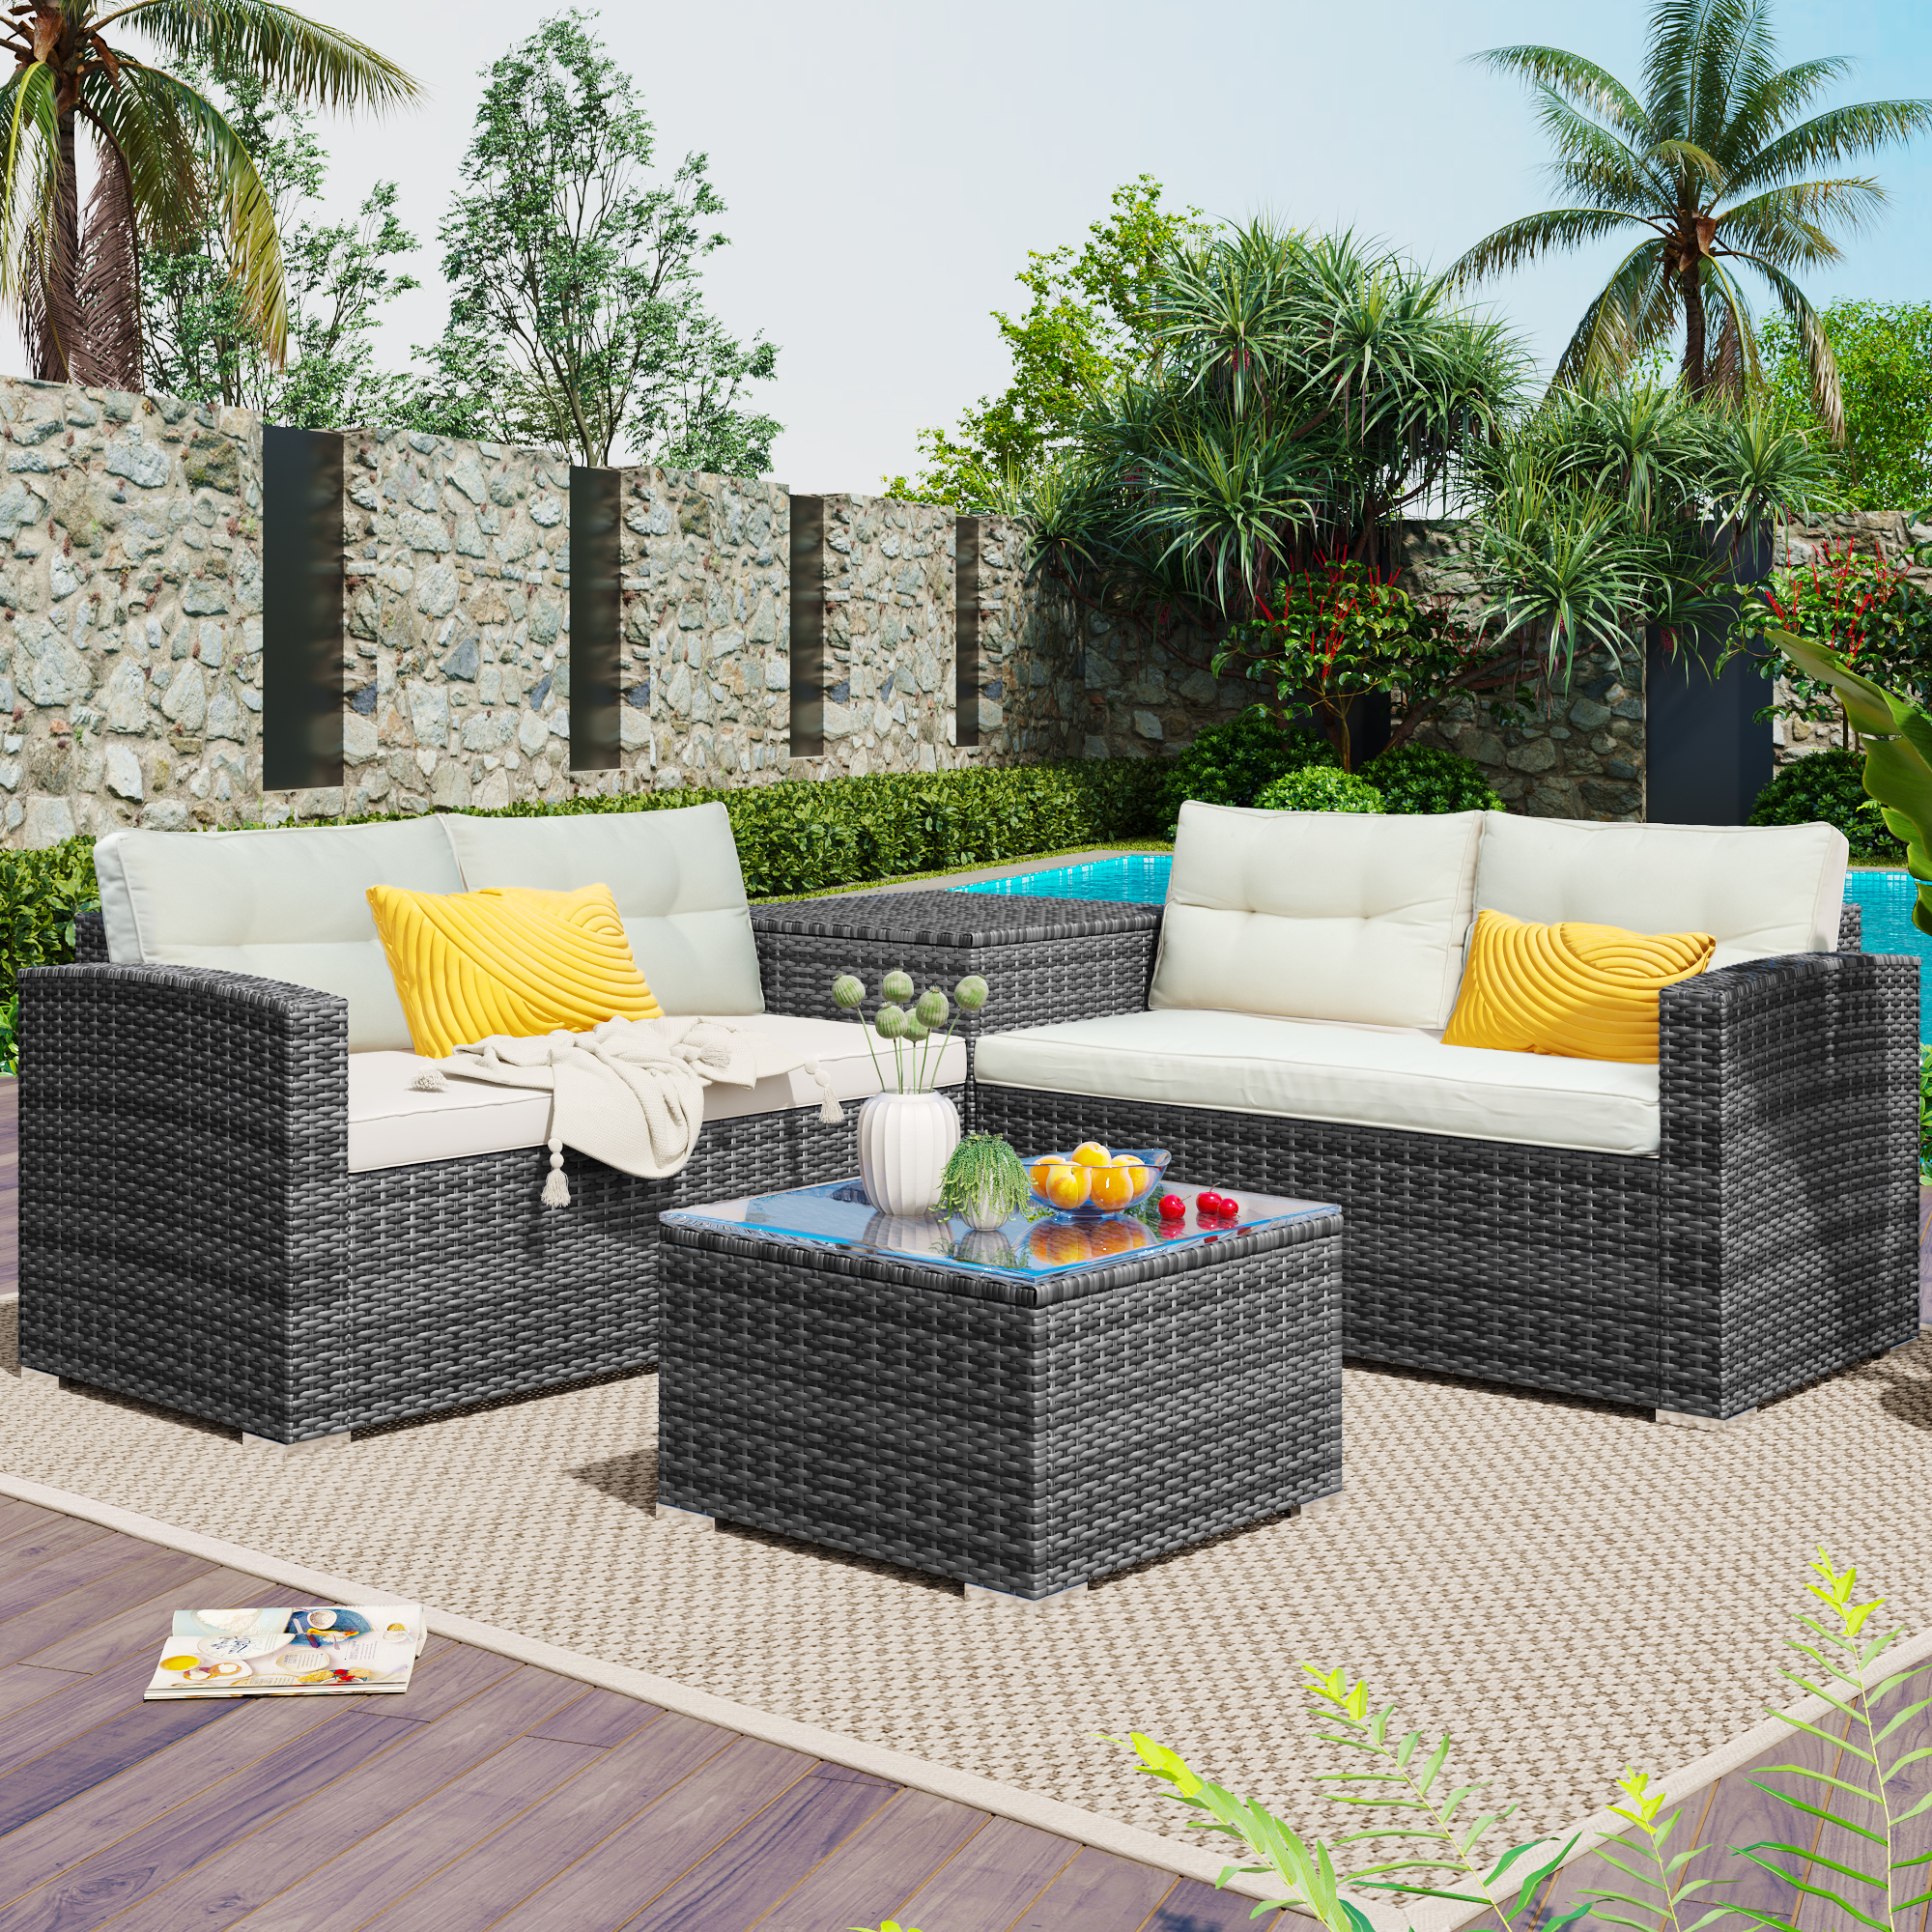 UHOMEPRO Outdoor Patio Furniture Set, 4-Piece PE Rattan Wicker Patio Dining Table Set, Outdoor Conversation Sets with Glass Coffee Table, Patio Bistro Set for Backyard Porch Garden Poolside, Q13777 - image 1 of 12